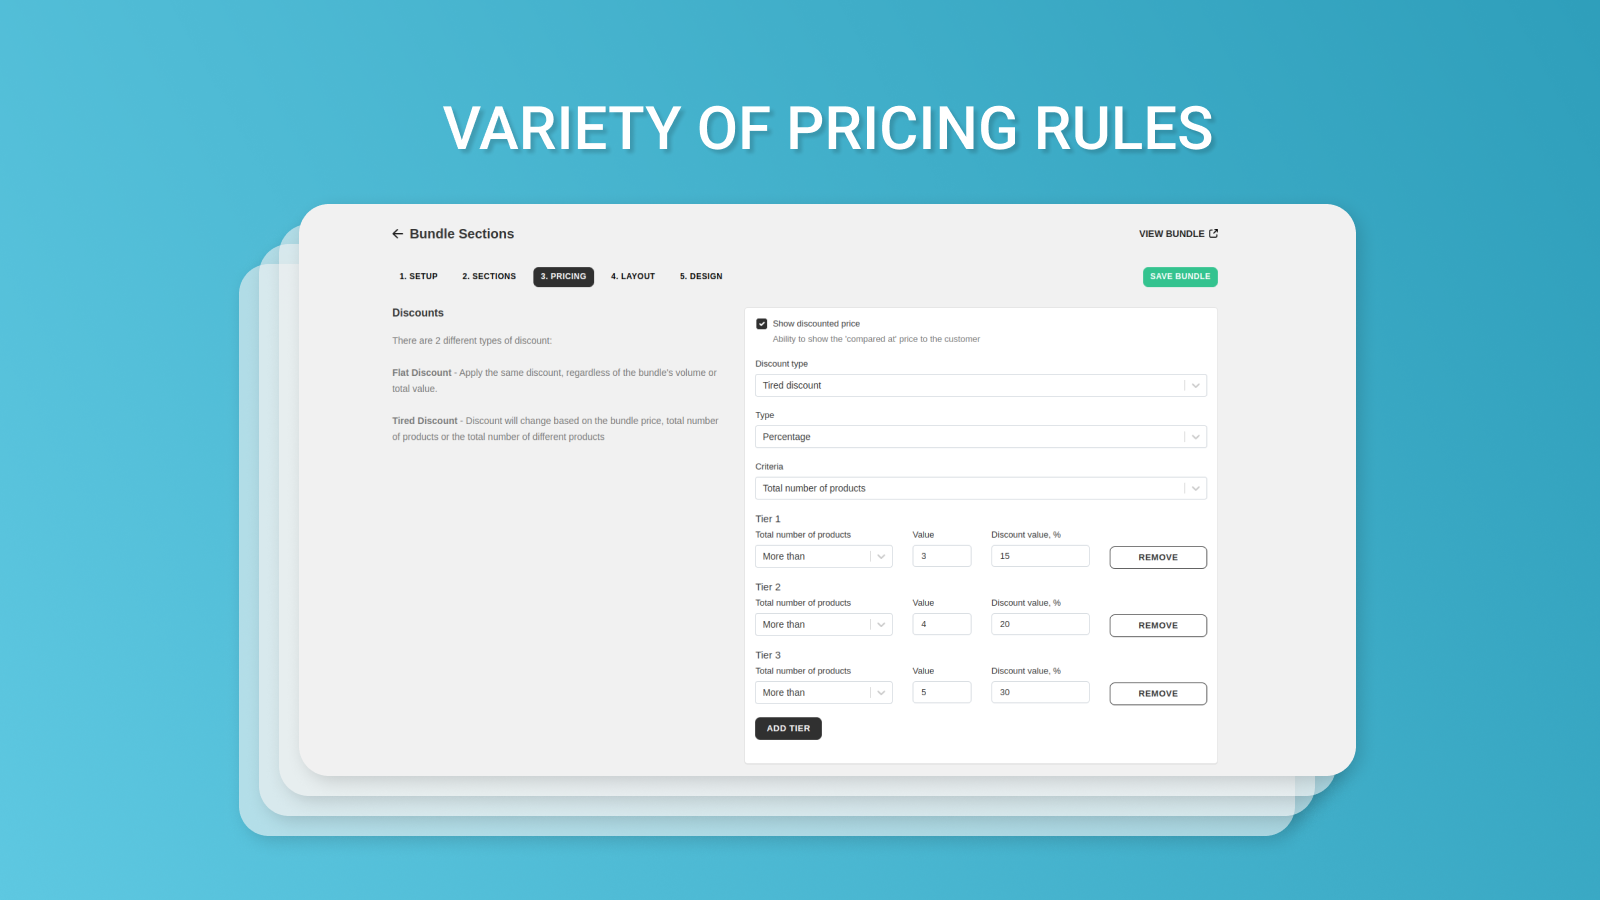 Variety of pricing rules